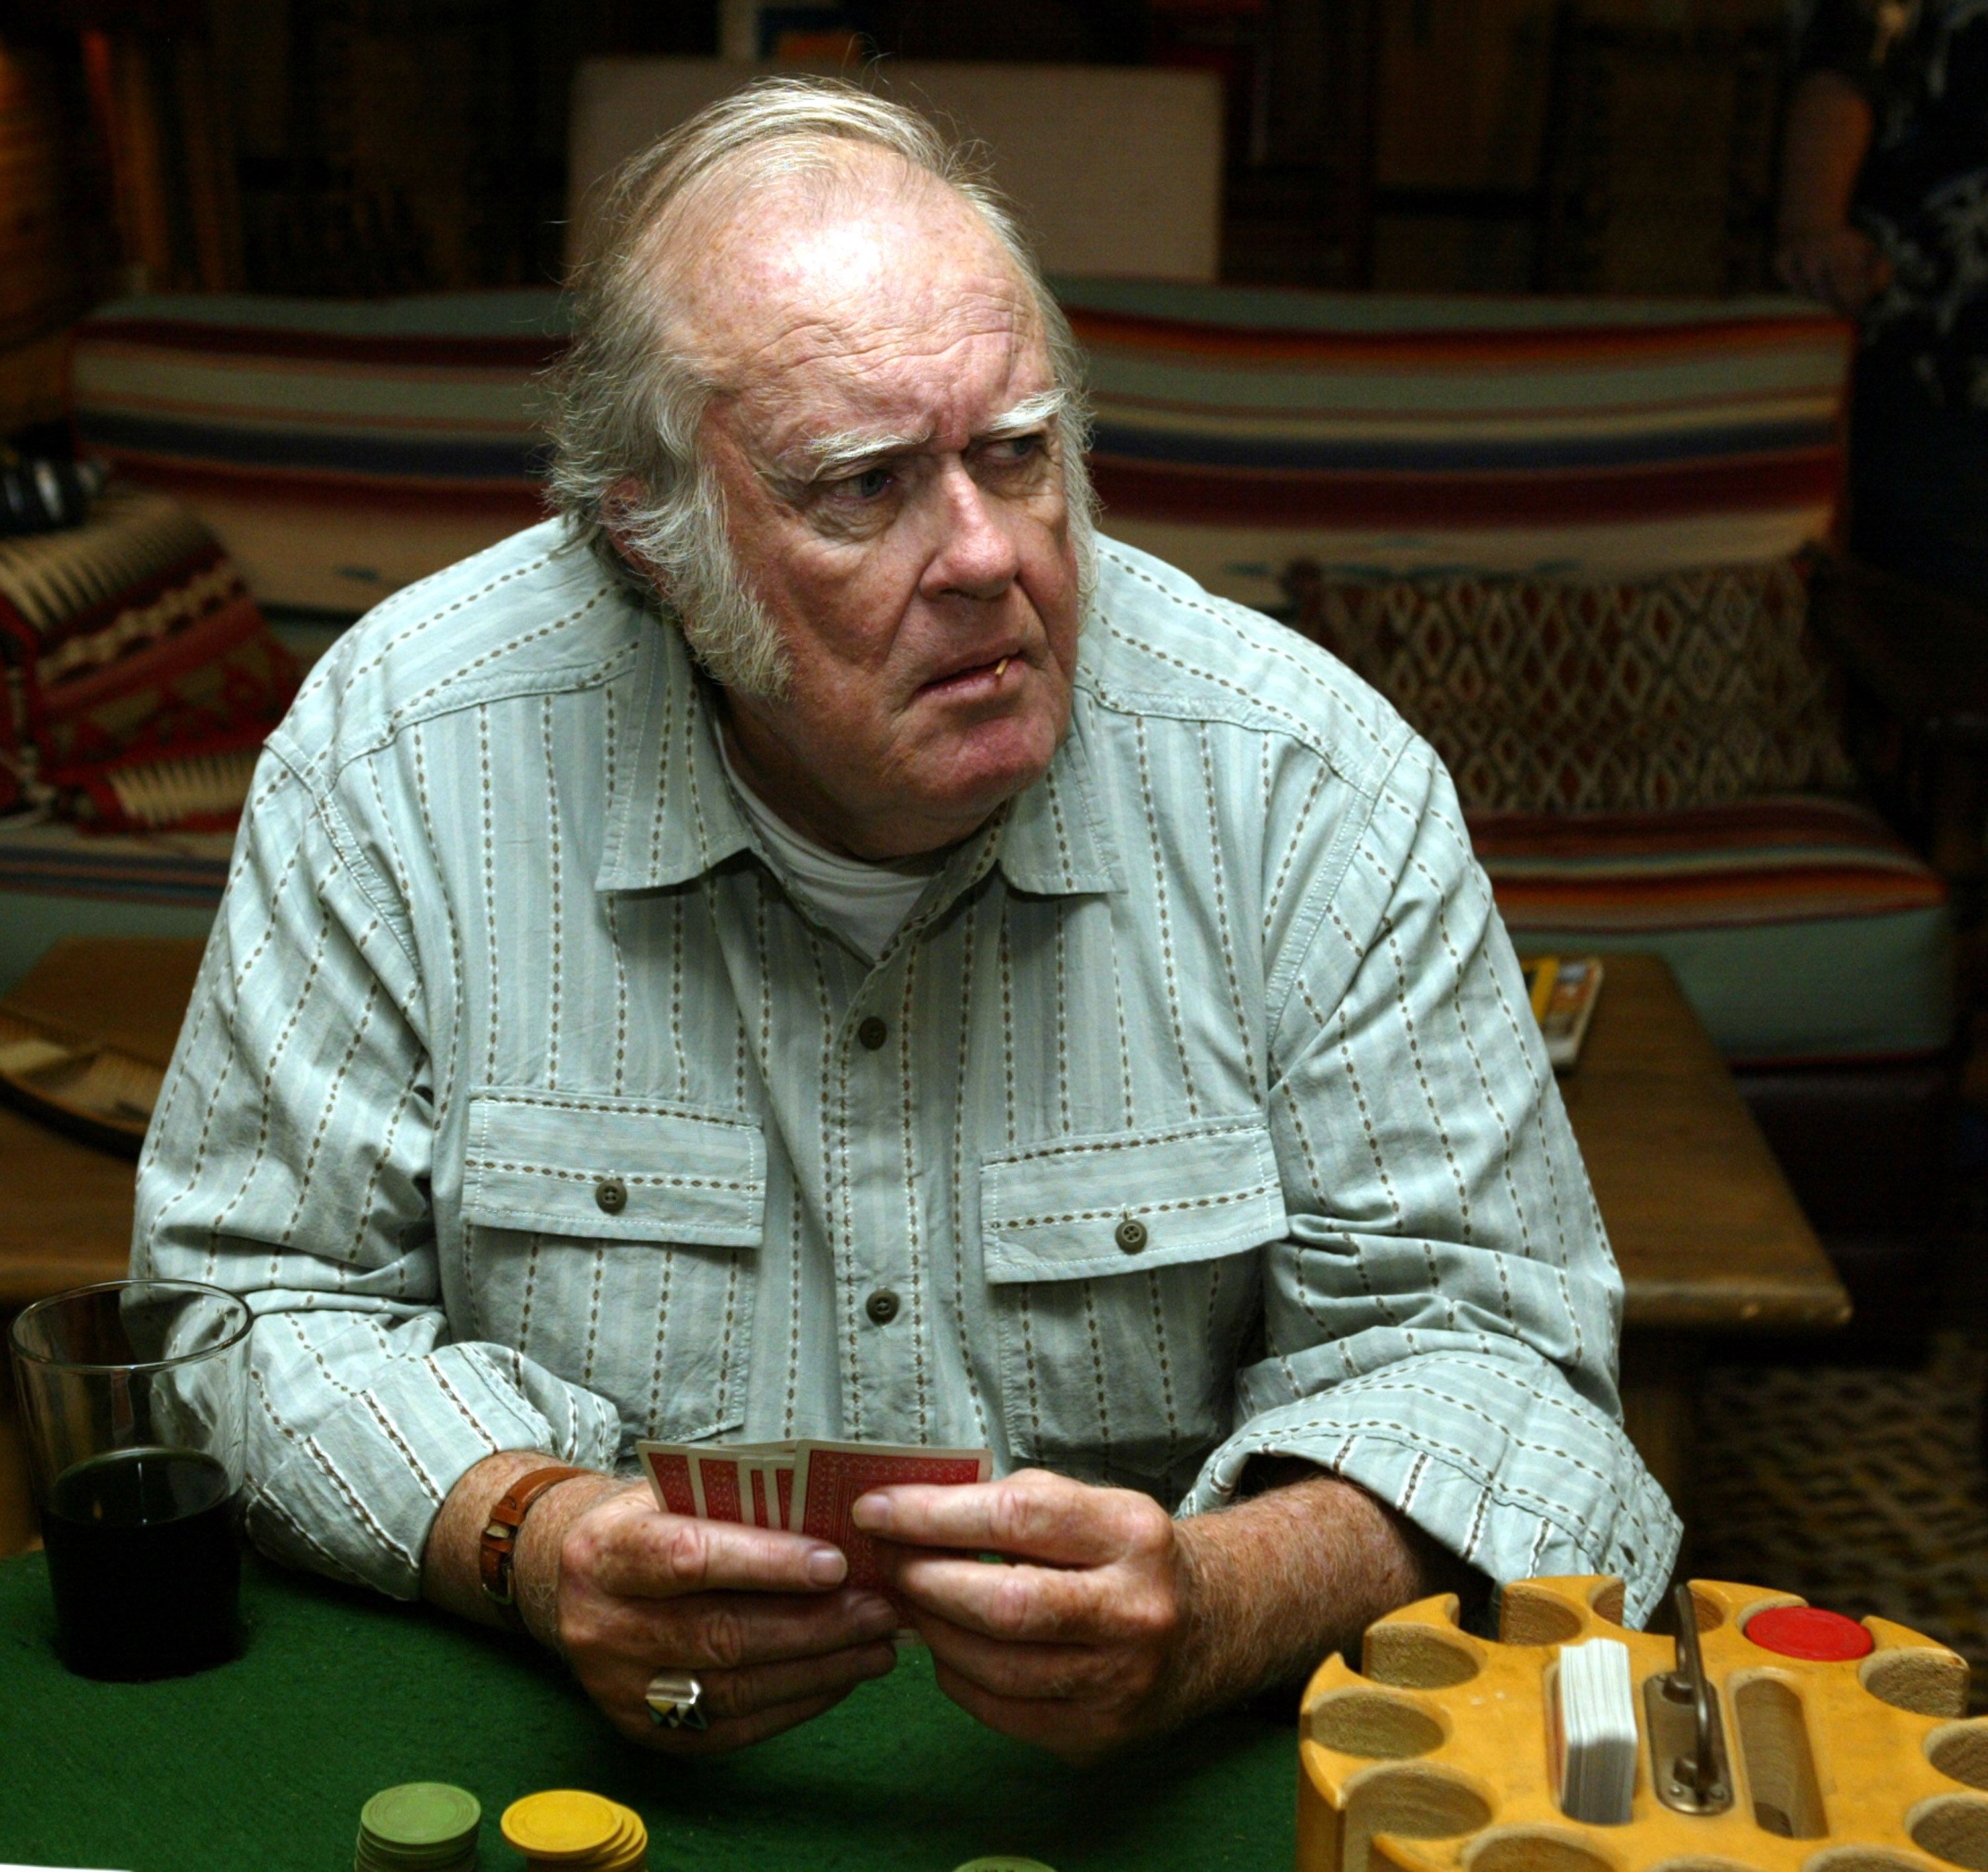 M. Emmet Walsh on the set of "Inn Trouble" on June 12, 2004, at Zaca Lake Retreat in Buellton, California, United States. | Source: Getty Images